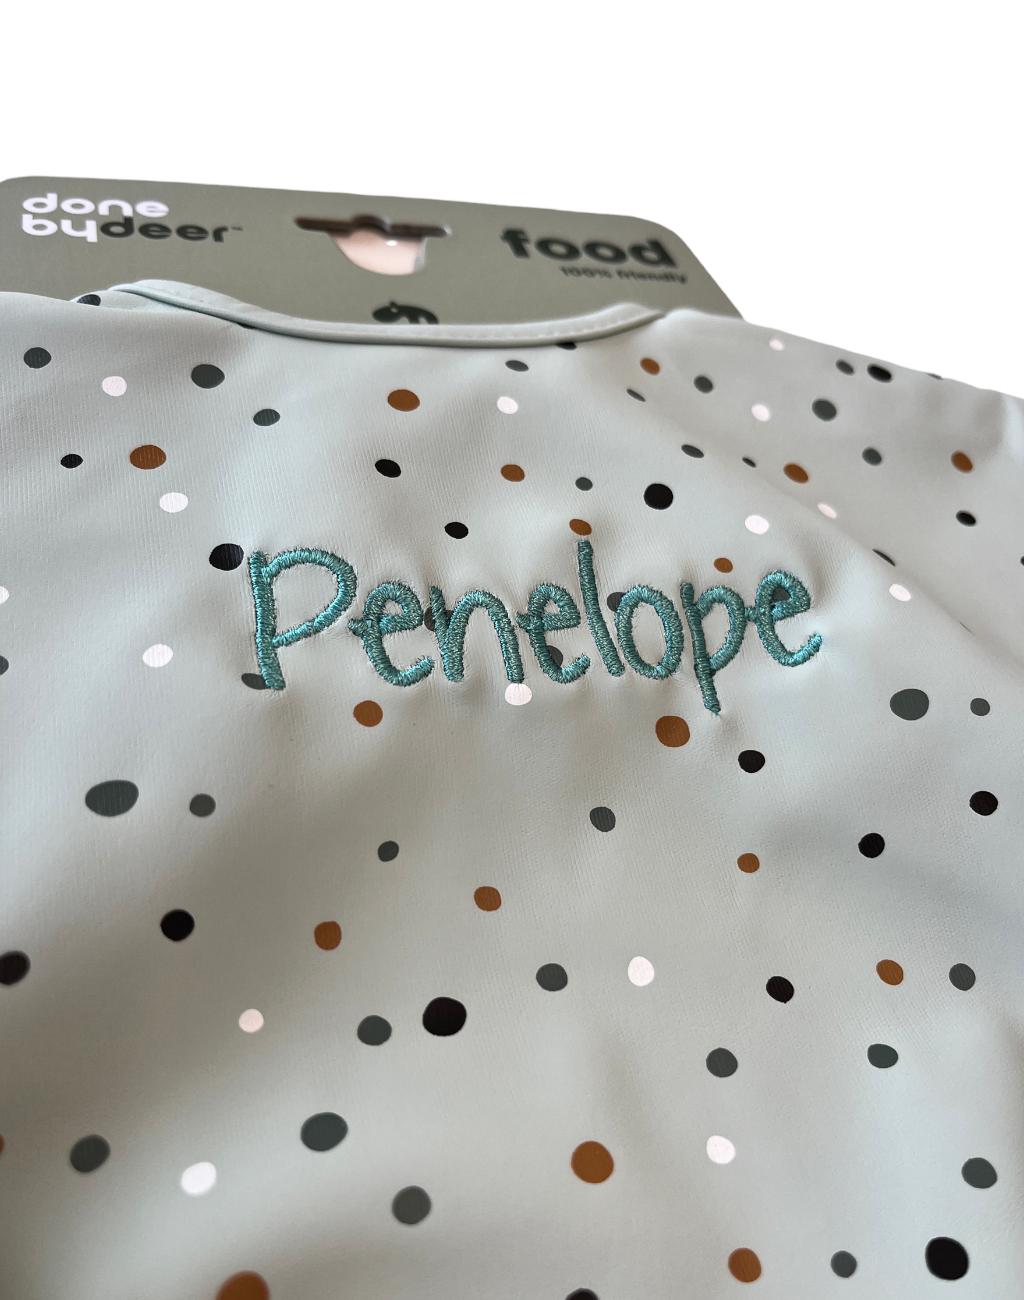 Sleeved pocket bib - happy dots - green - By done by deer